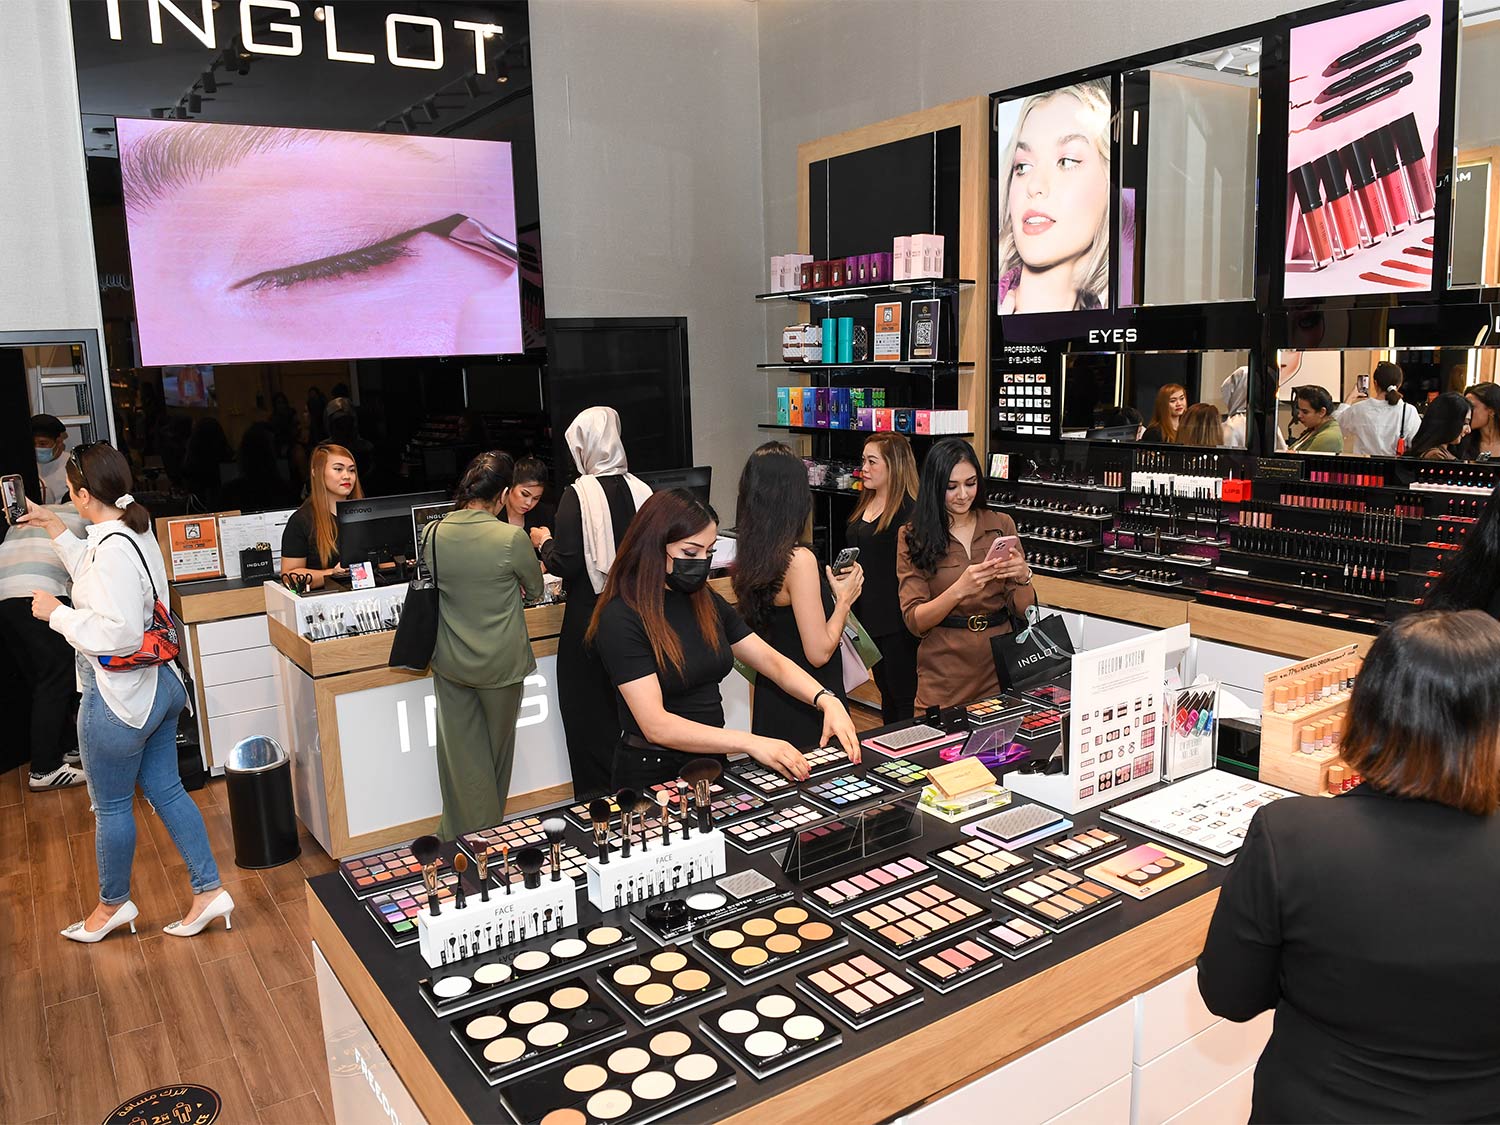 Inglot sets out to define beauty with new launch